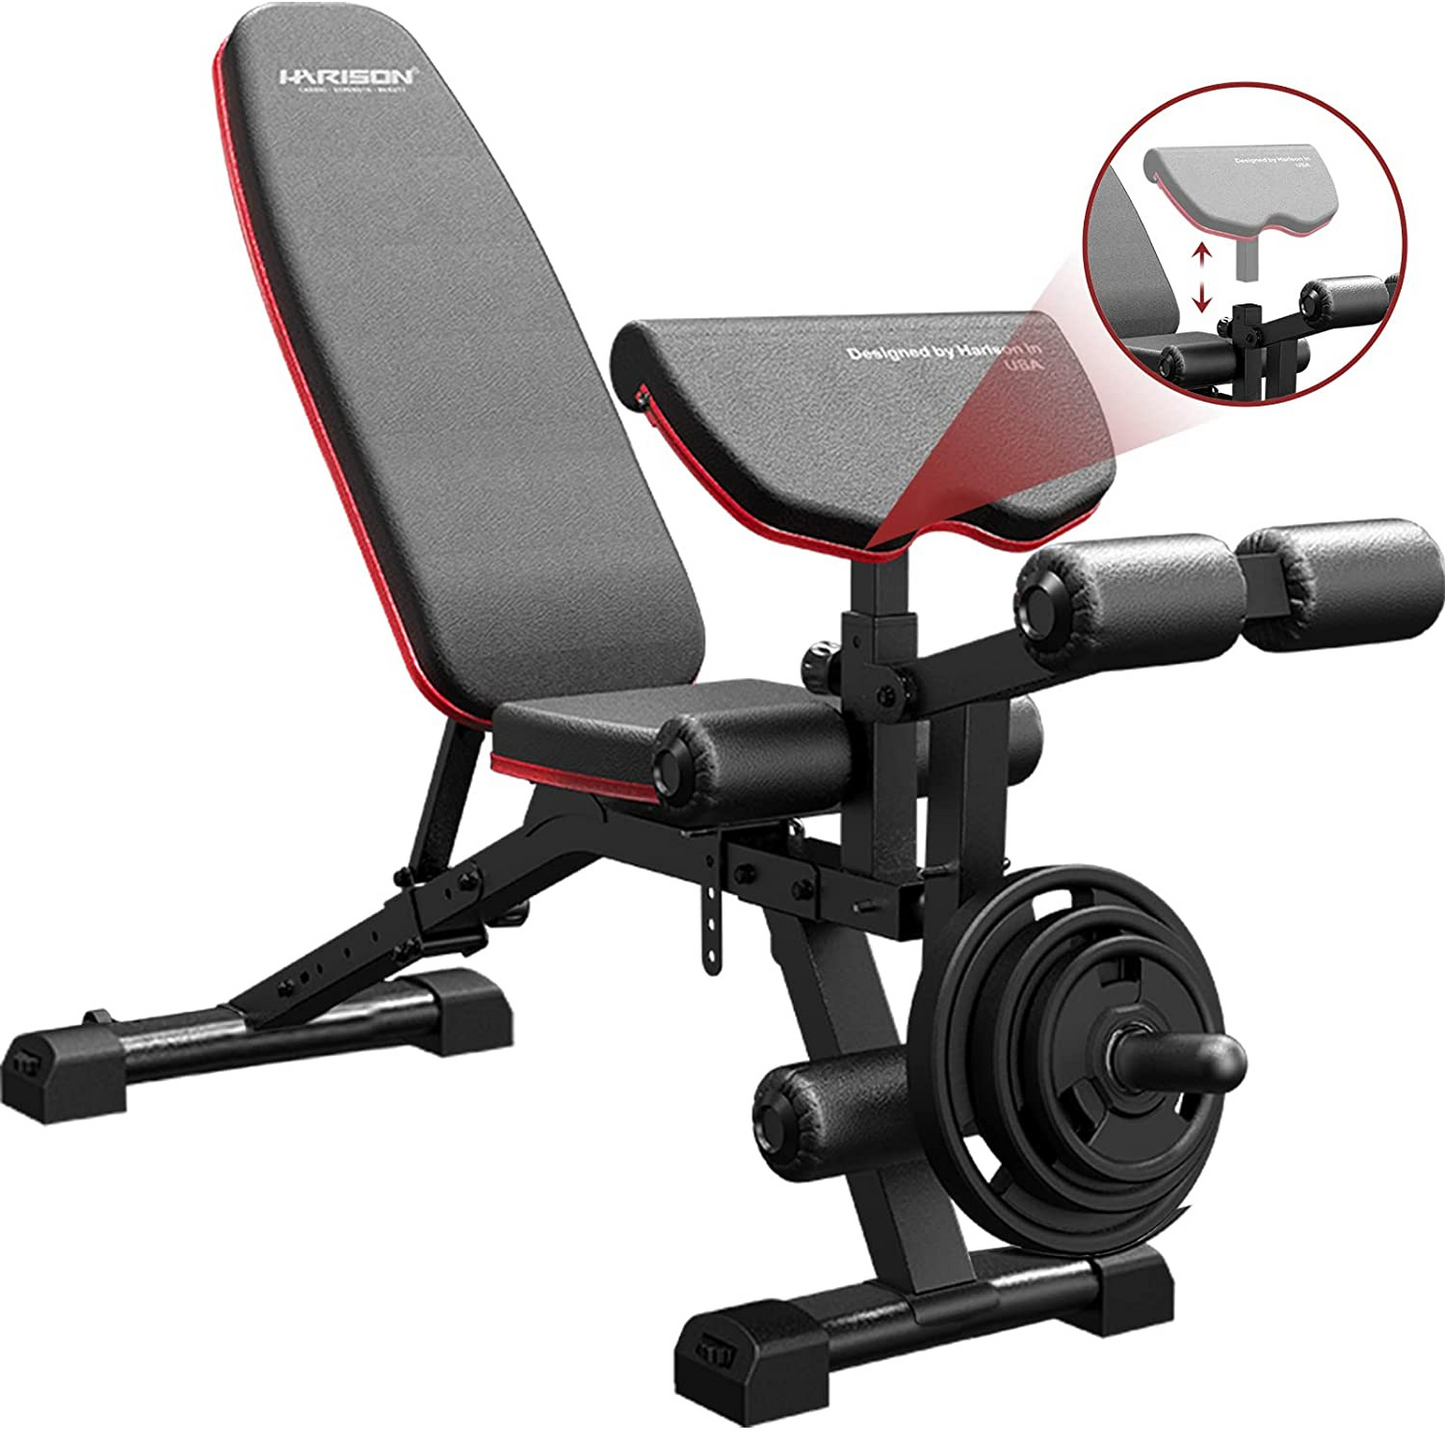 HARISON HR-609 Weight Bench Adjustable Utility Exercise with Barbell Rack and Priest Pad